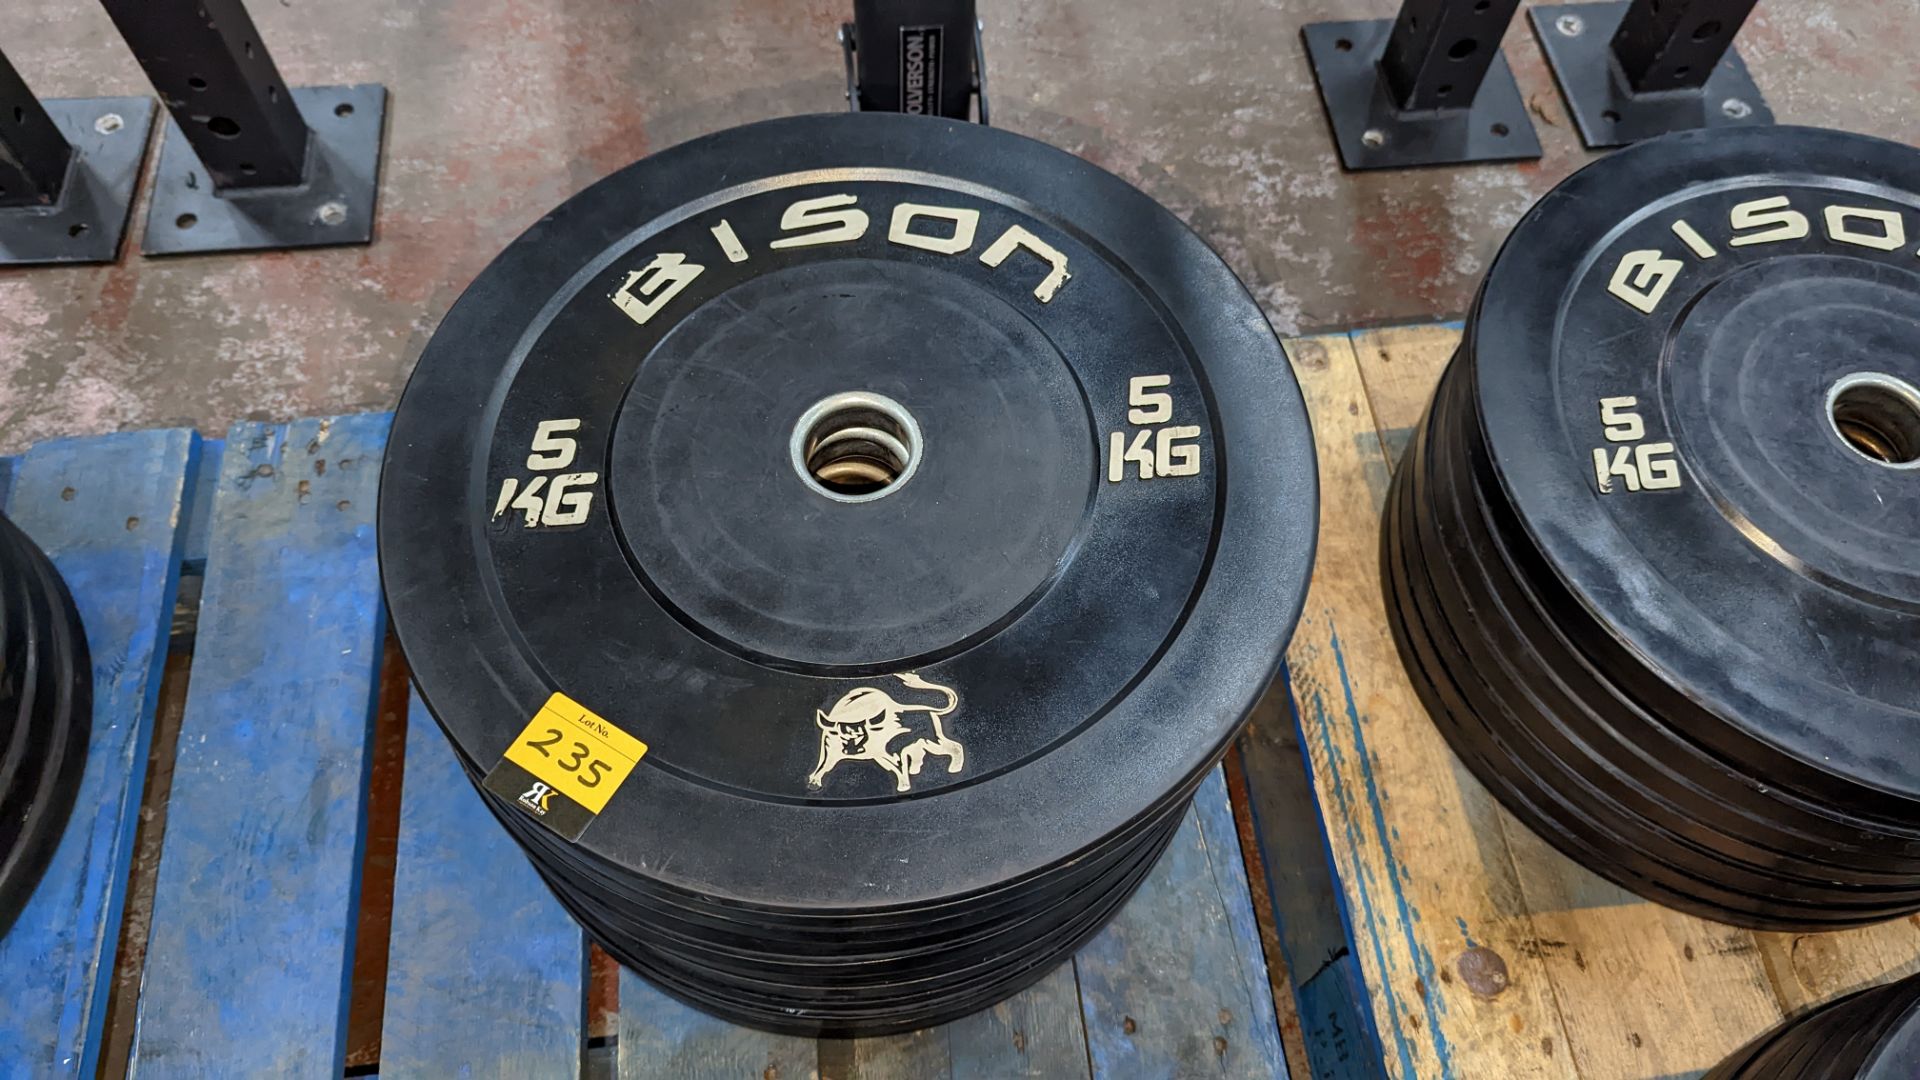 10 off Bison 5kg rubberised Olympic plates - Image 2 of 3